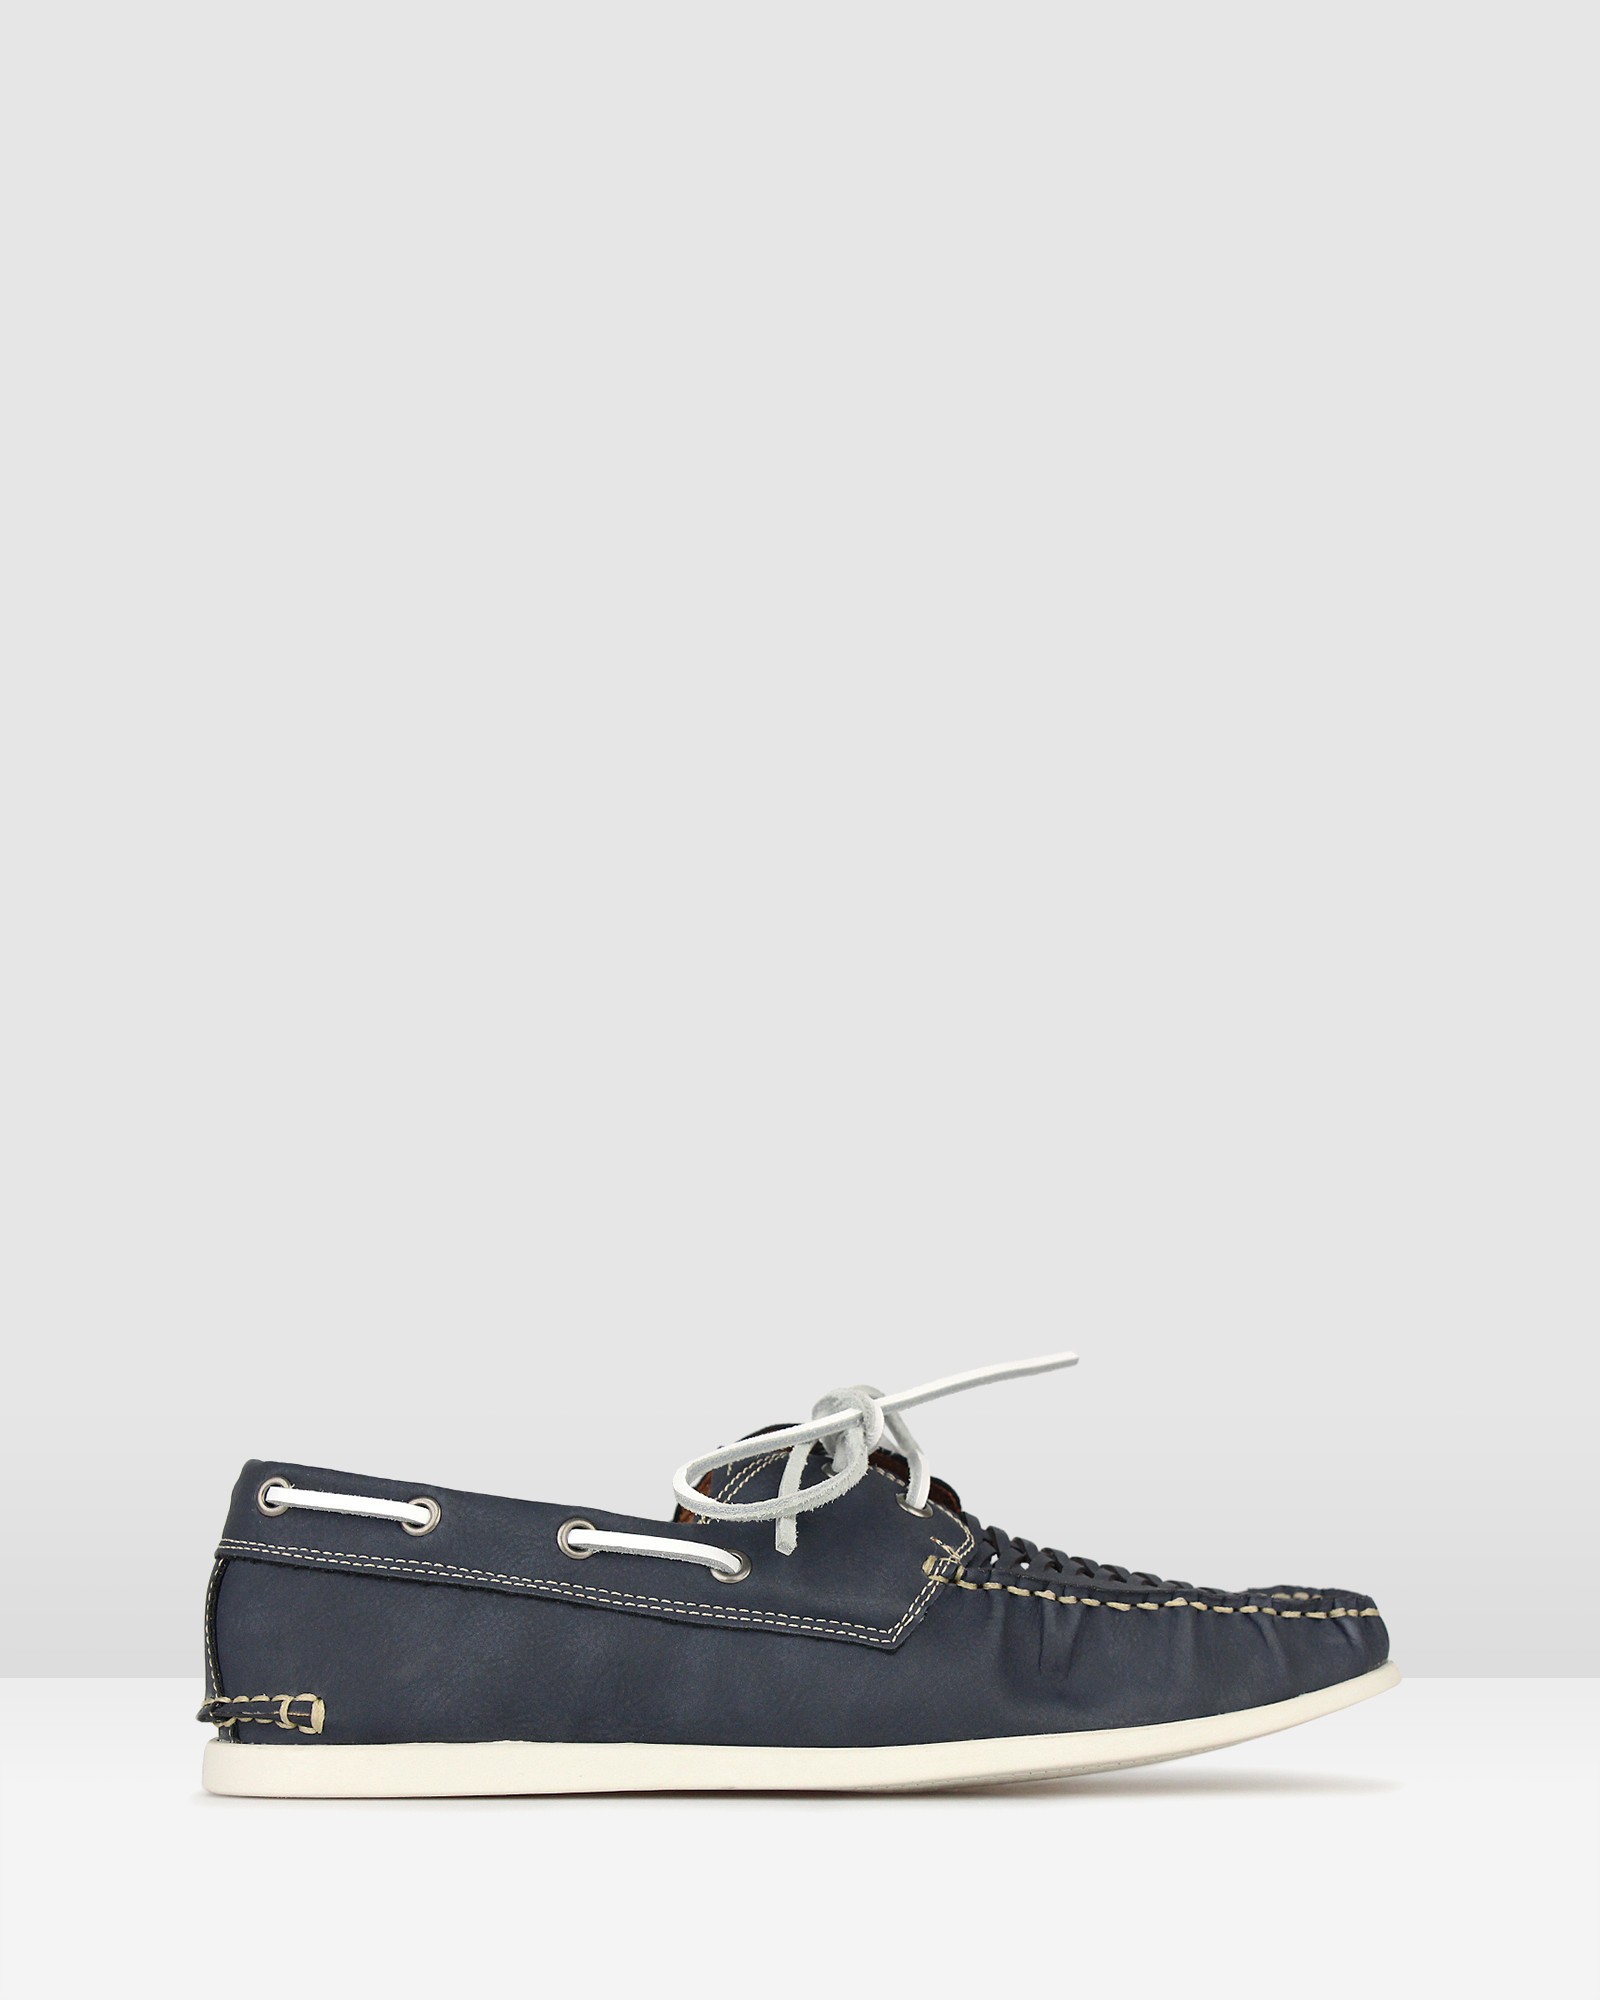 Row Woven Boat Shoes Navy by Betts | ShoeSales